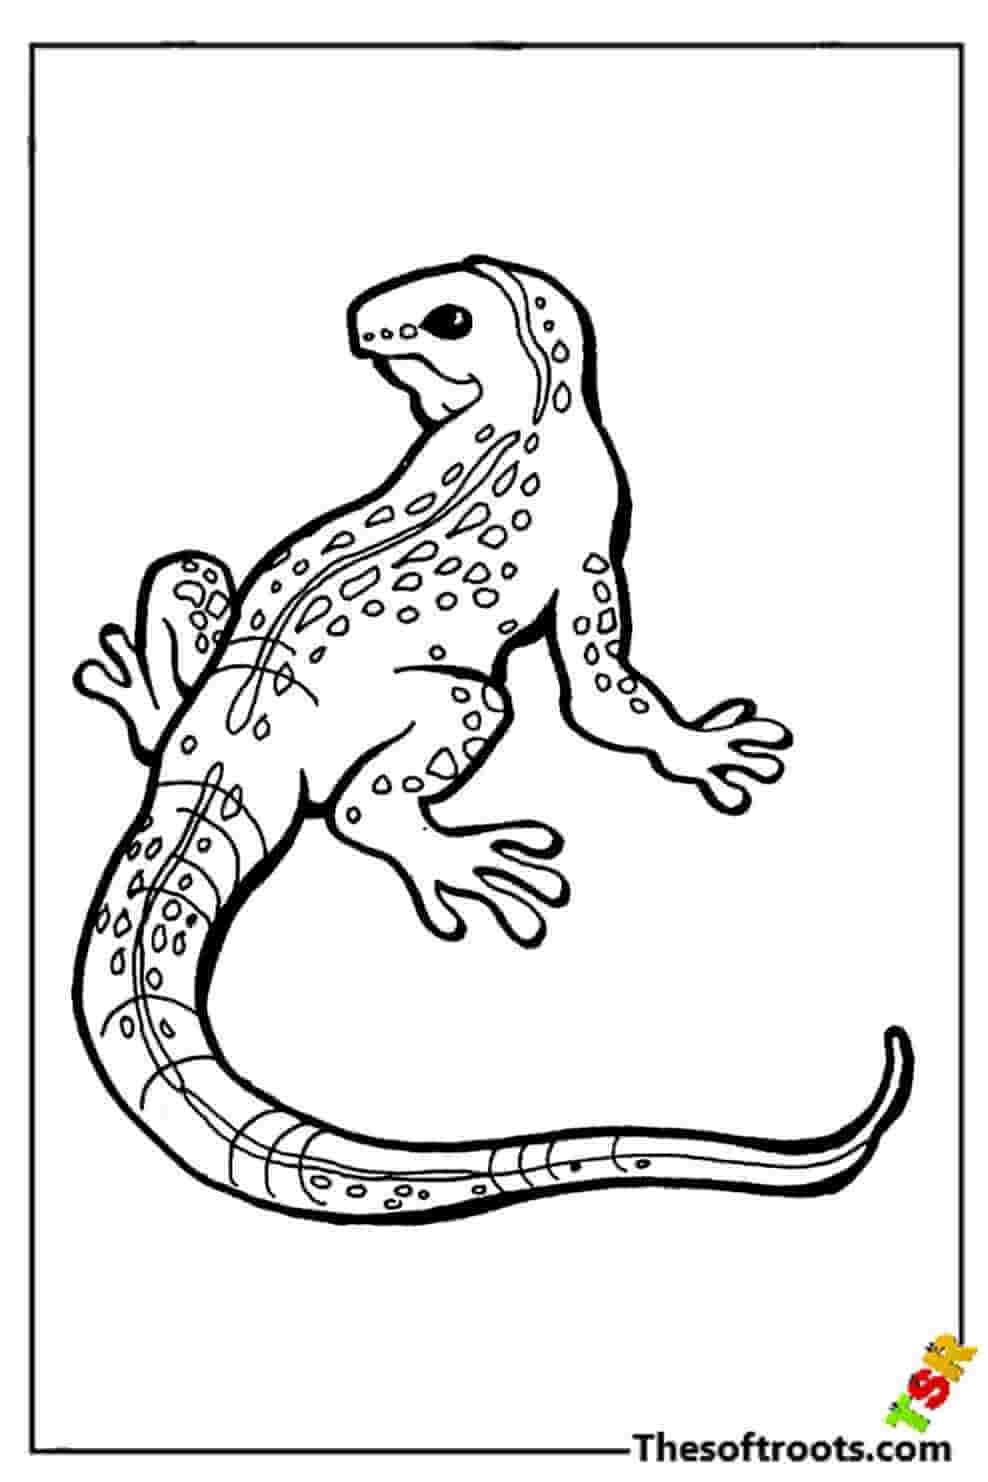 Easy lizard coloring pages